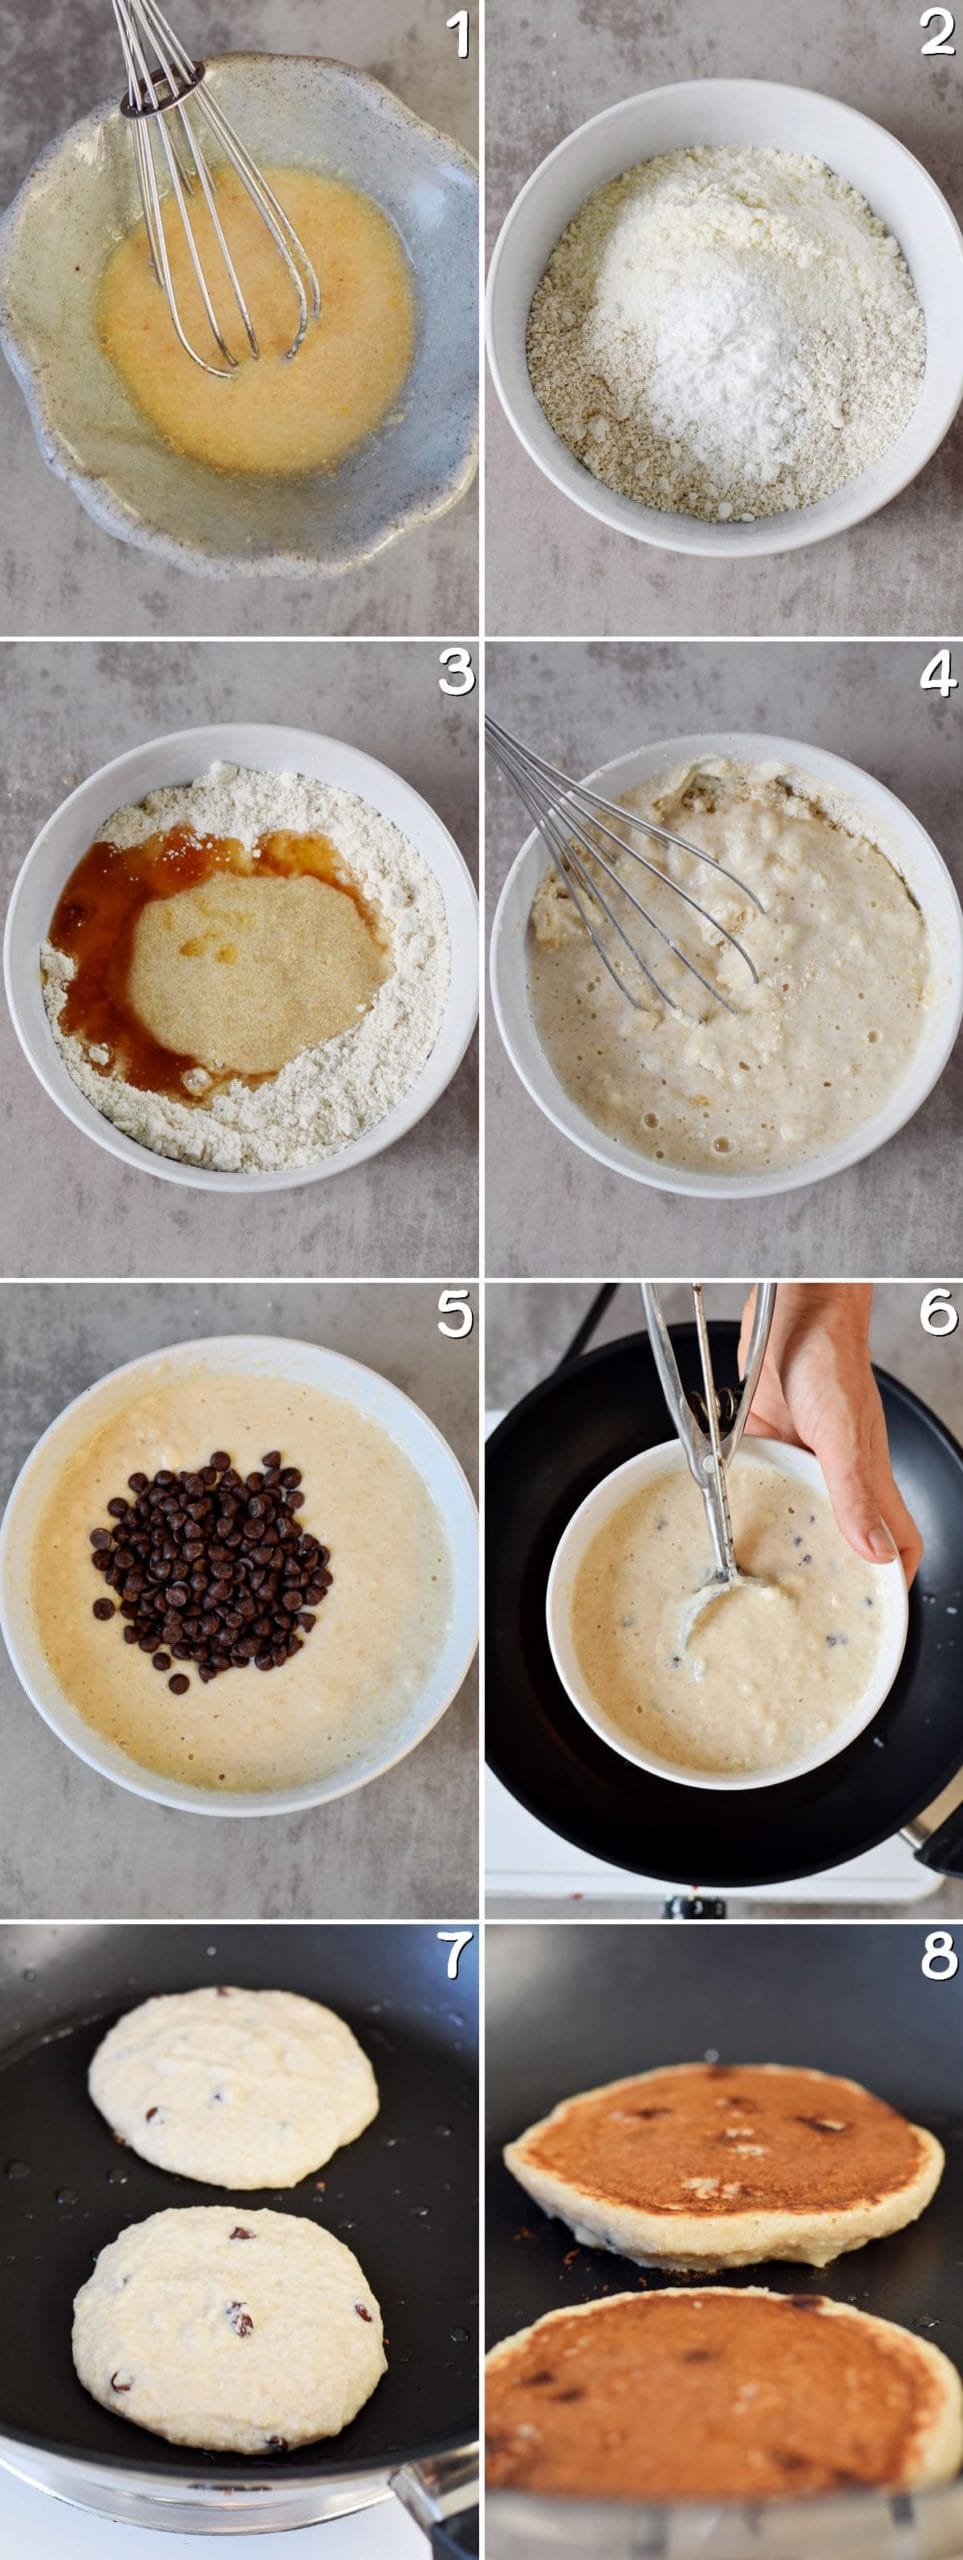 8 process shots of how to make chocolate chip pancakes